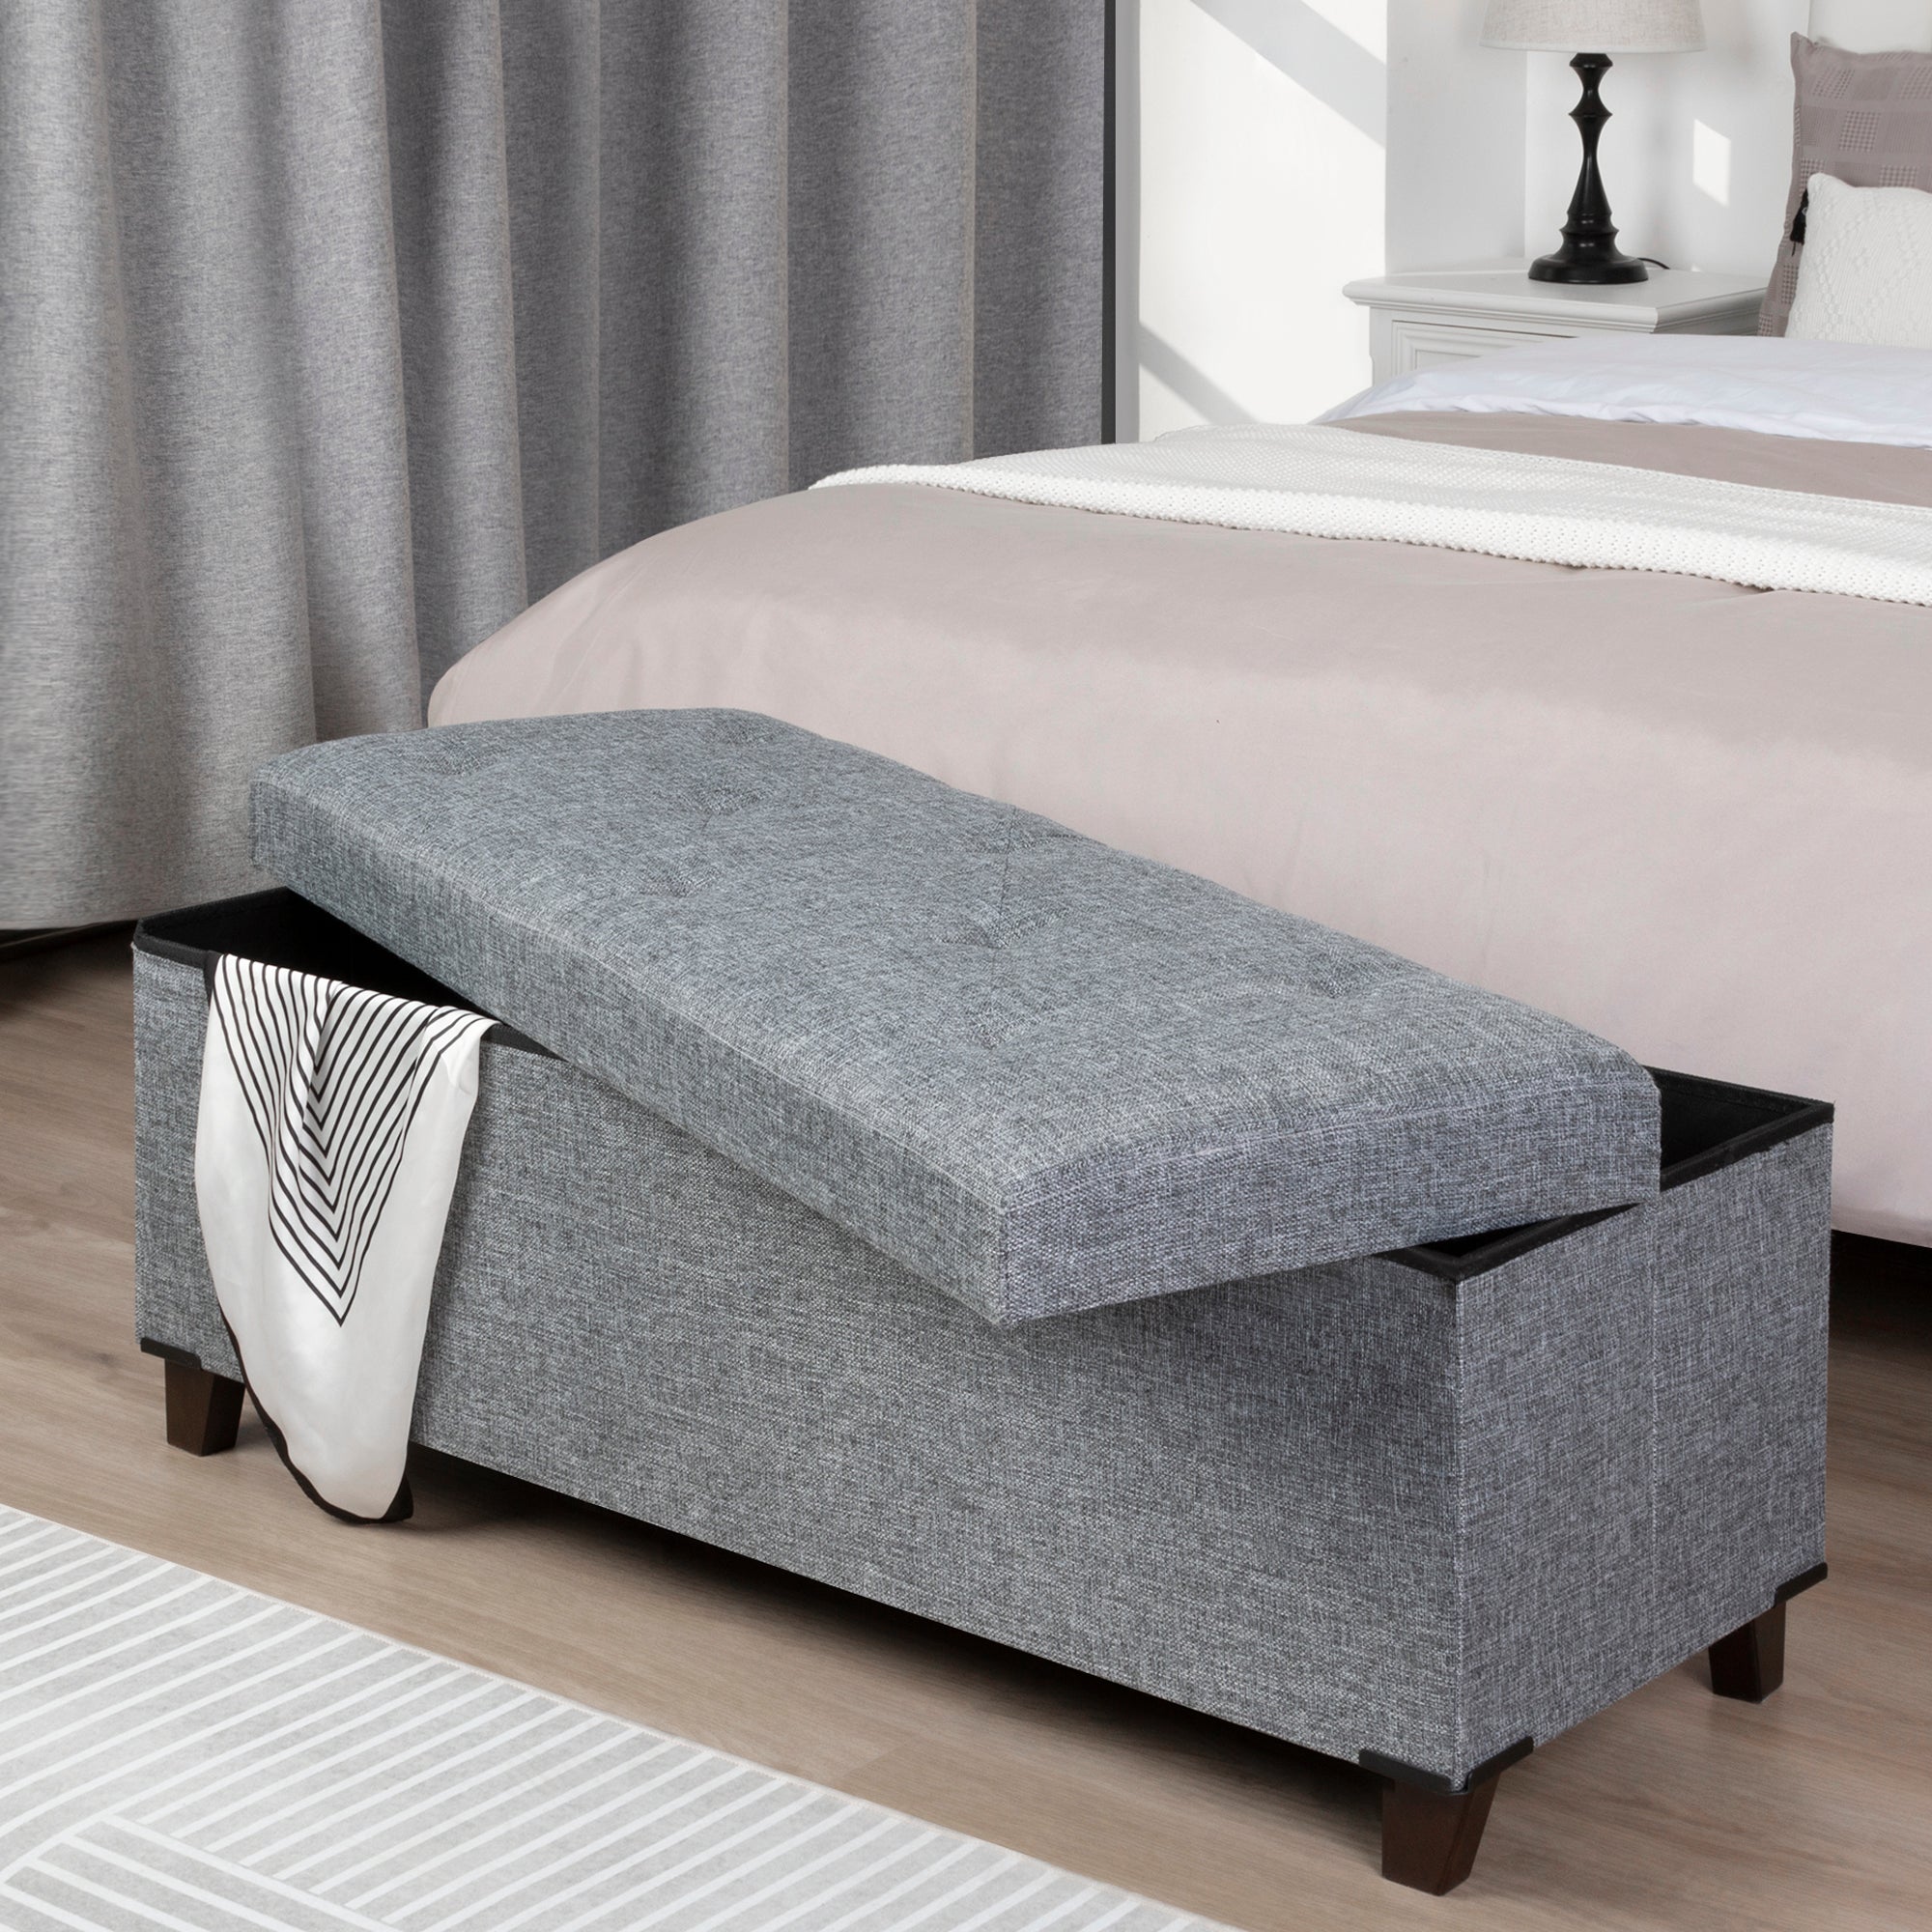 Fabric Storage Ottoman, Bench for Entryway and Bedroom